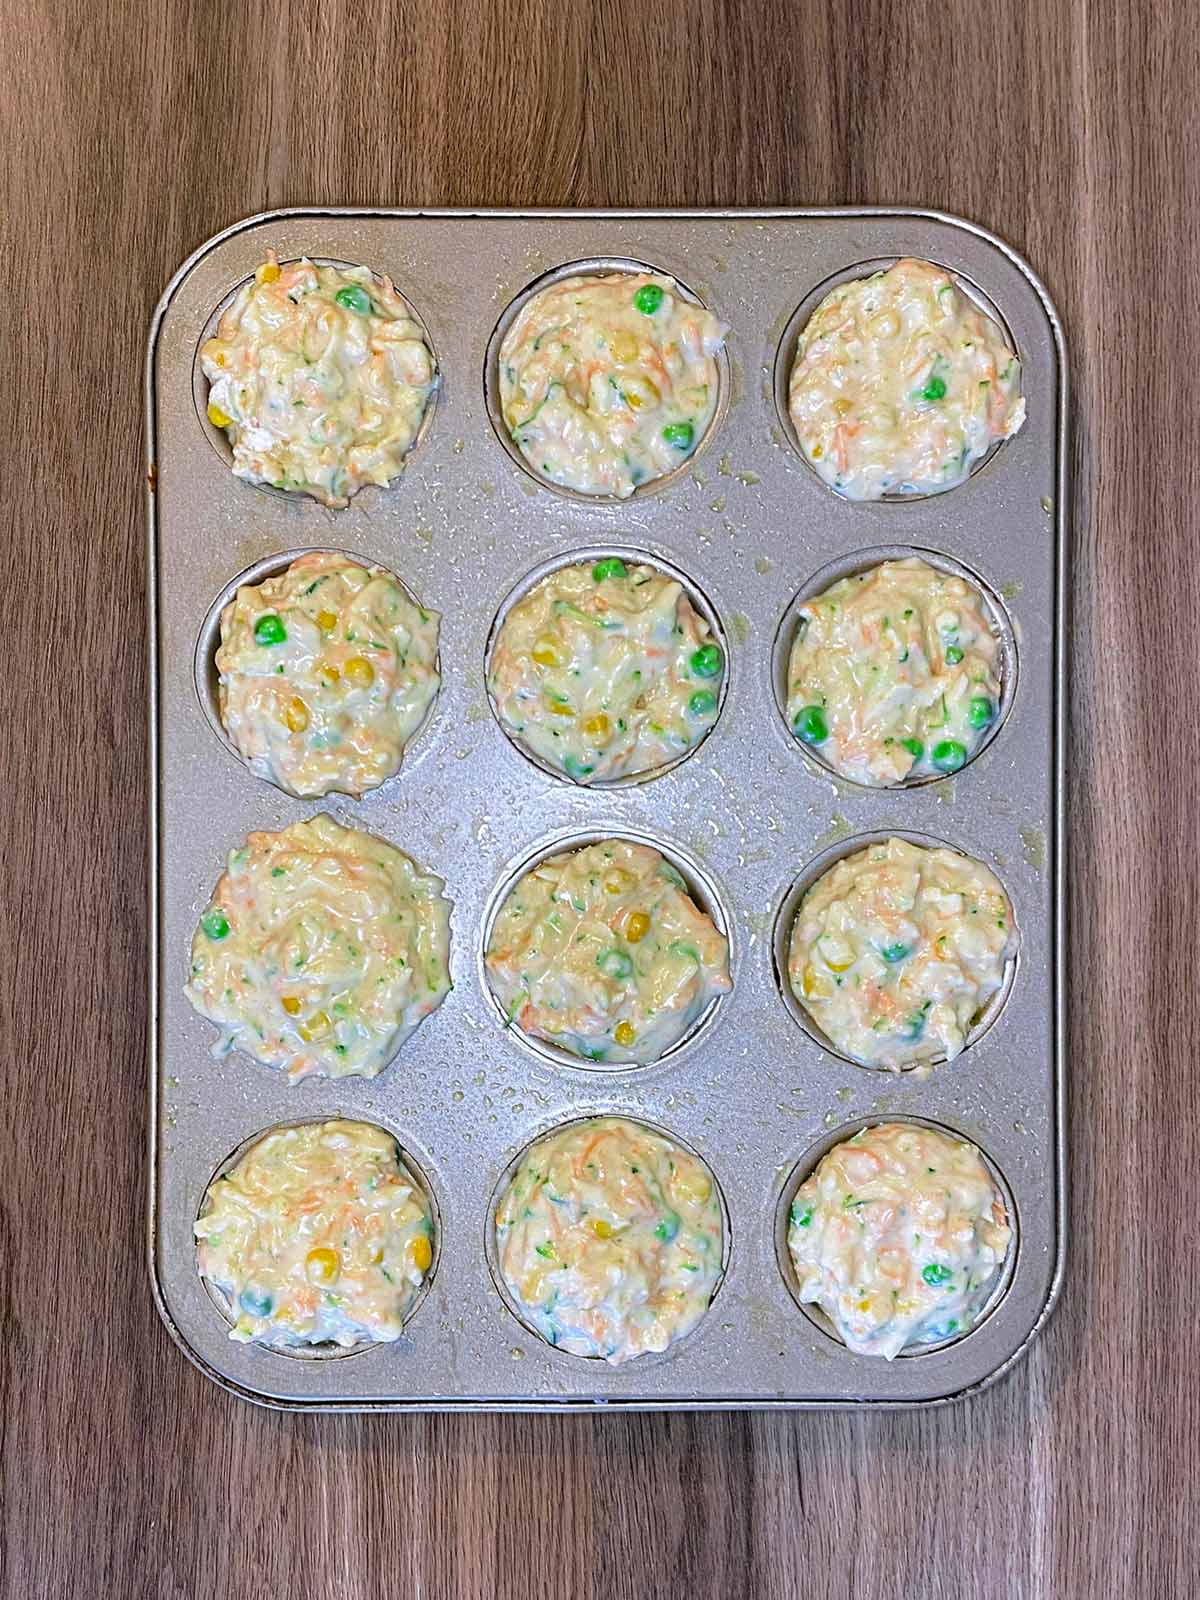 A twelve hole muffin tin filled with the muffin mixture.